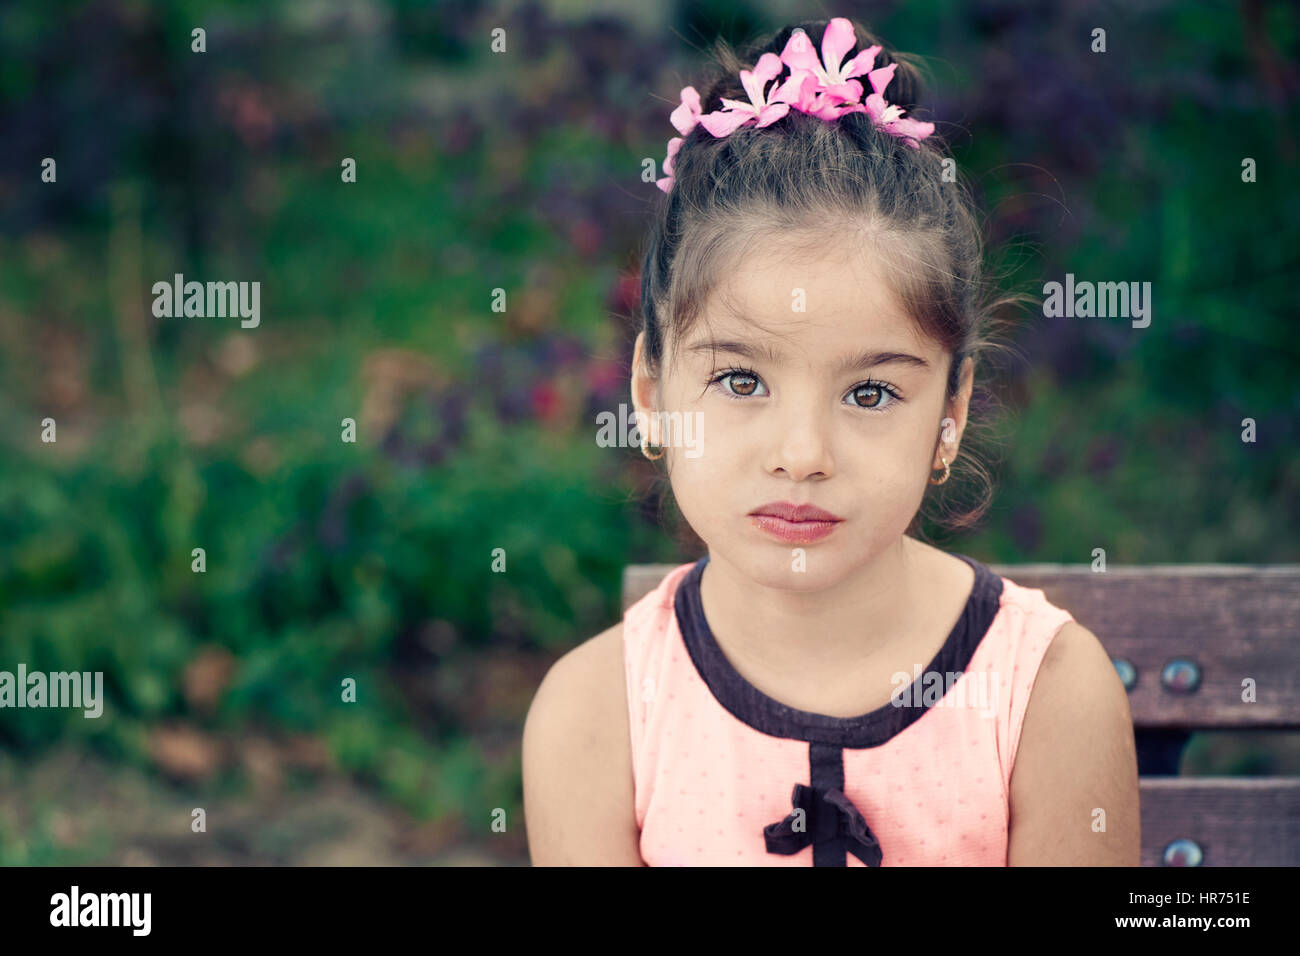 Portrait of little girl looking serious Stock Photo